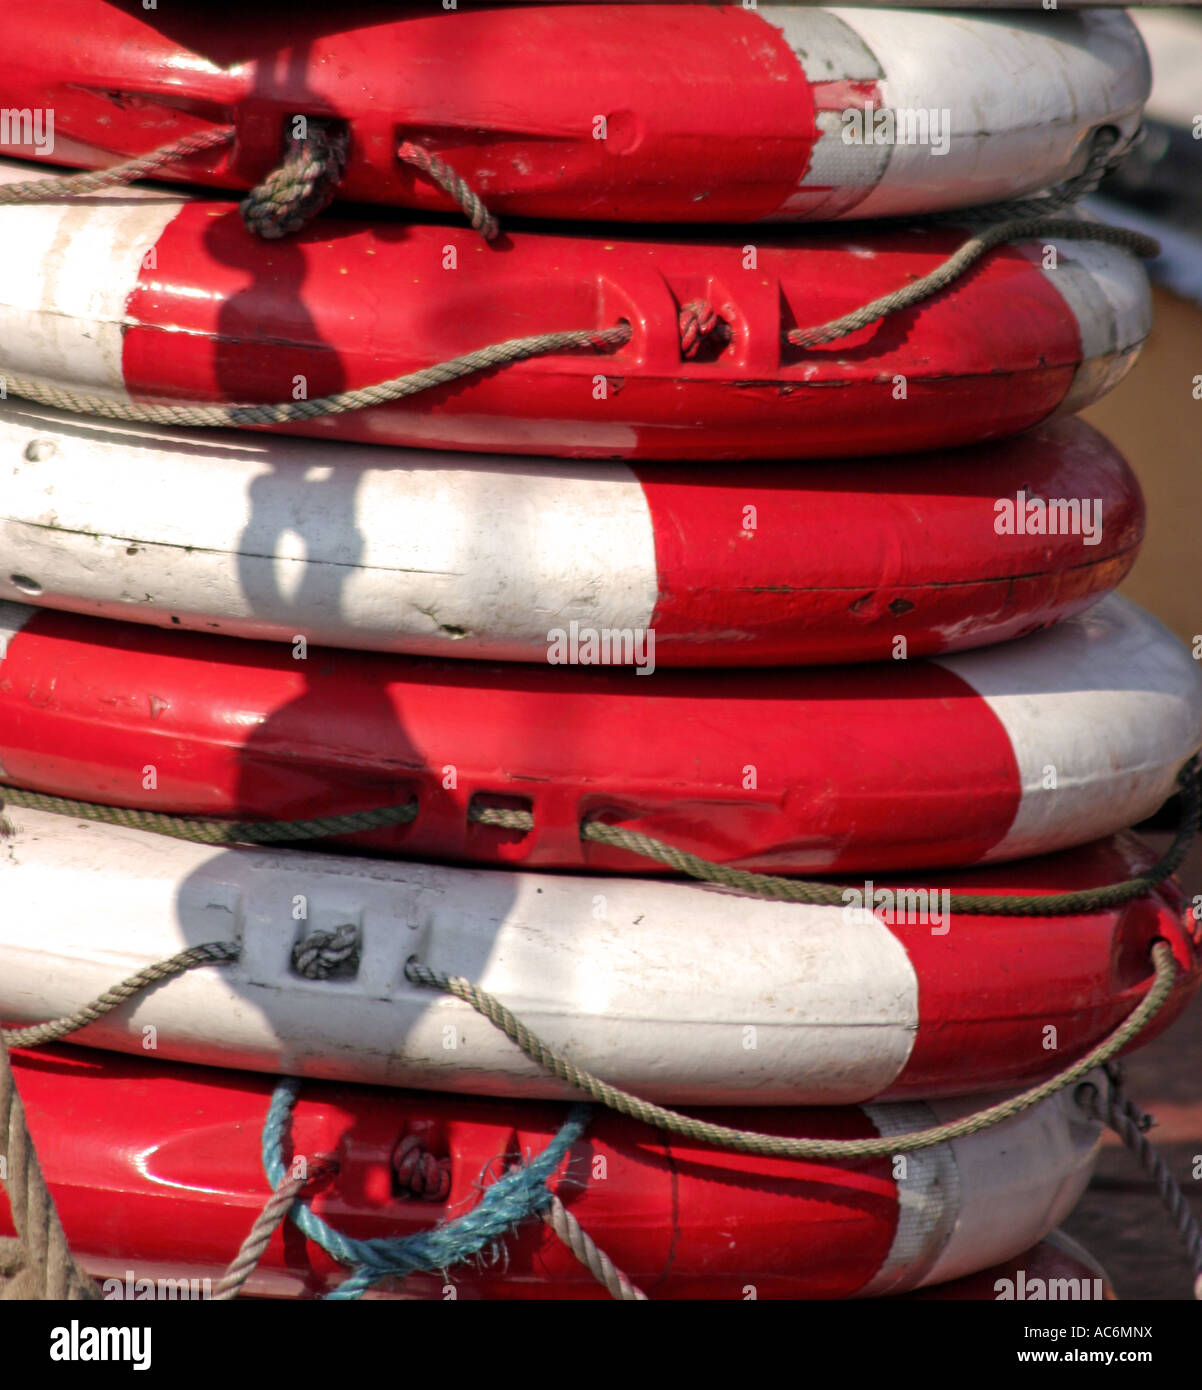 Pile of red and white lifebuoys Stock Photo